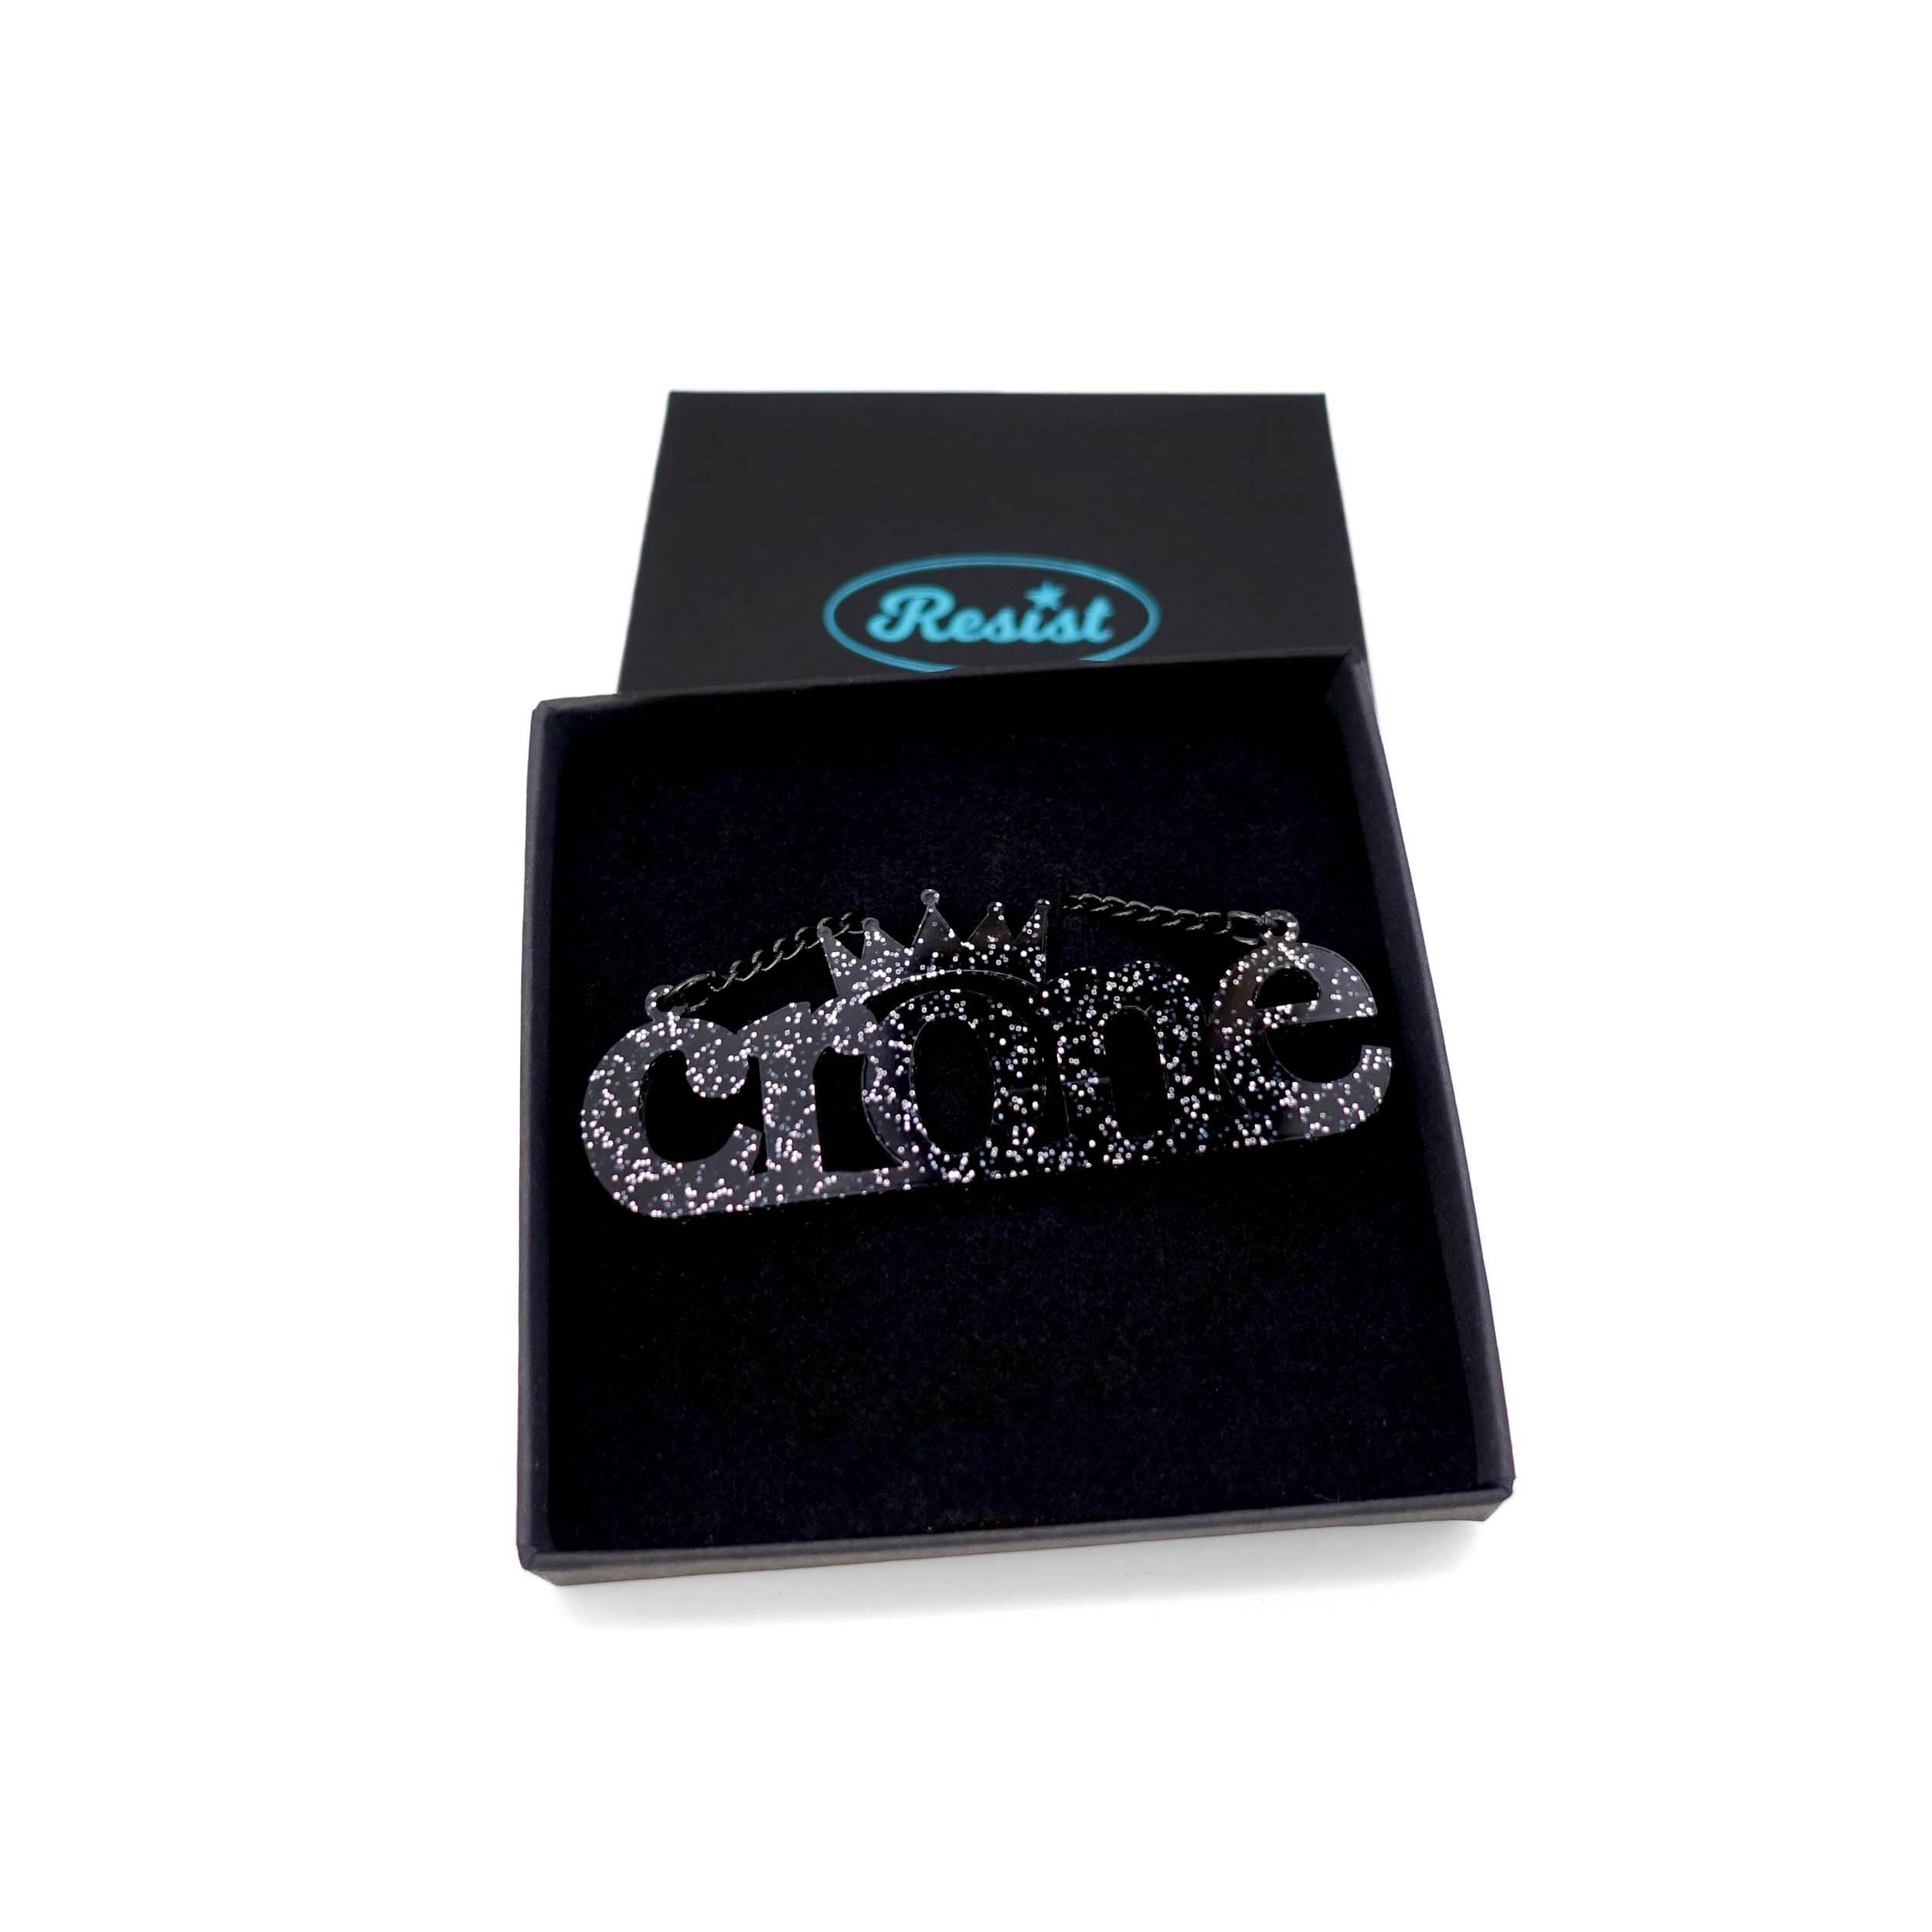 Crone necklace in black glitter, shown in a Wear and Resist gift box. 